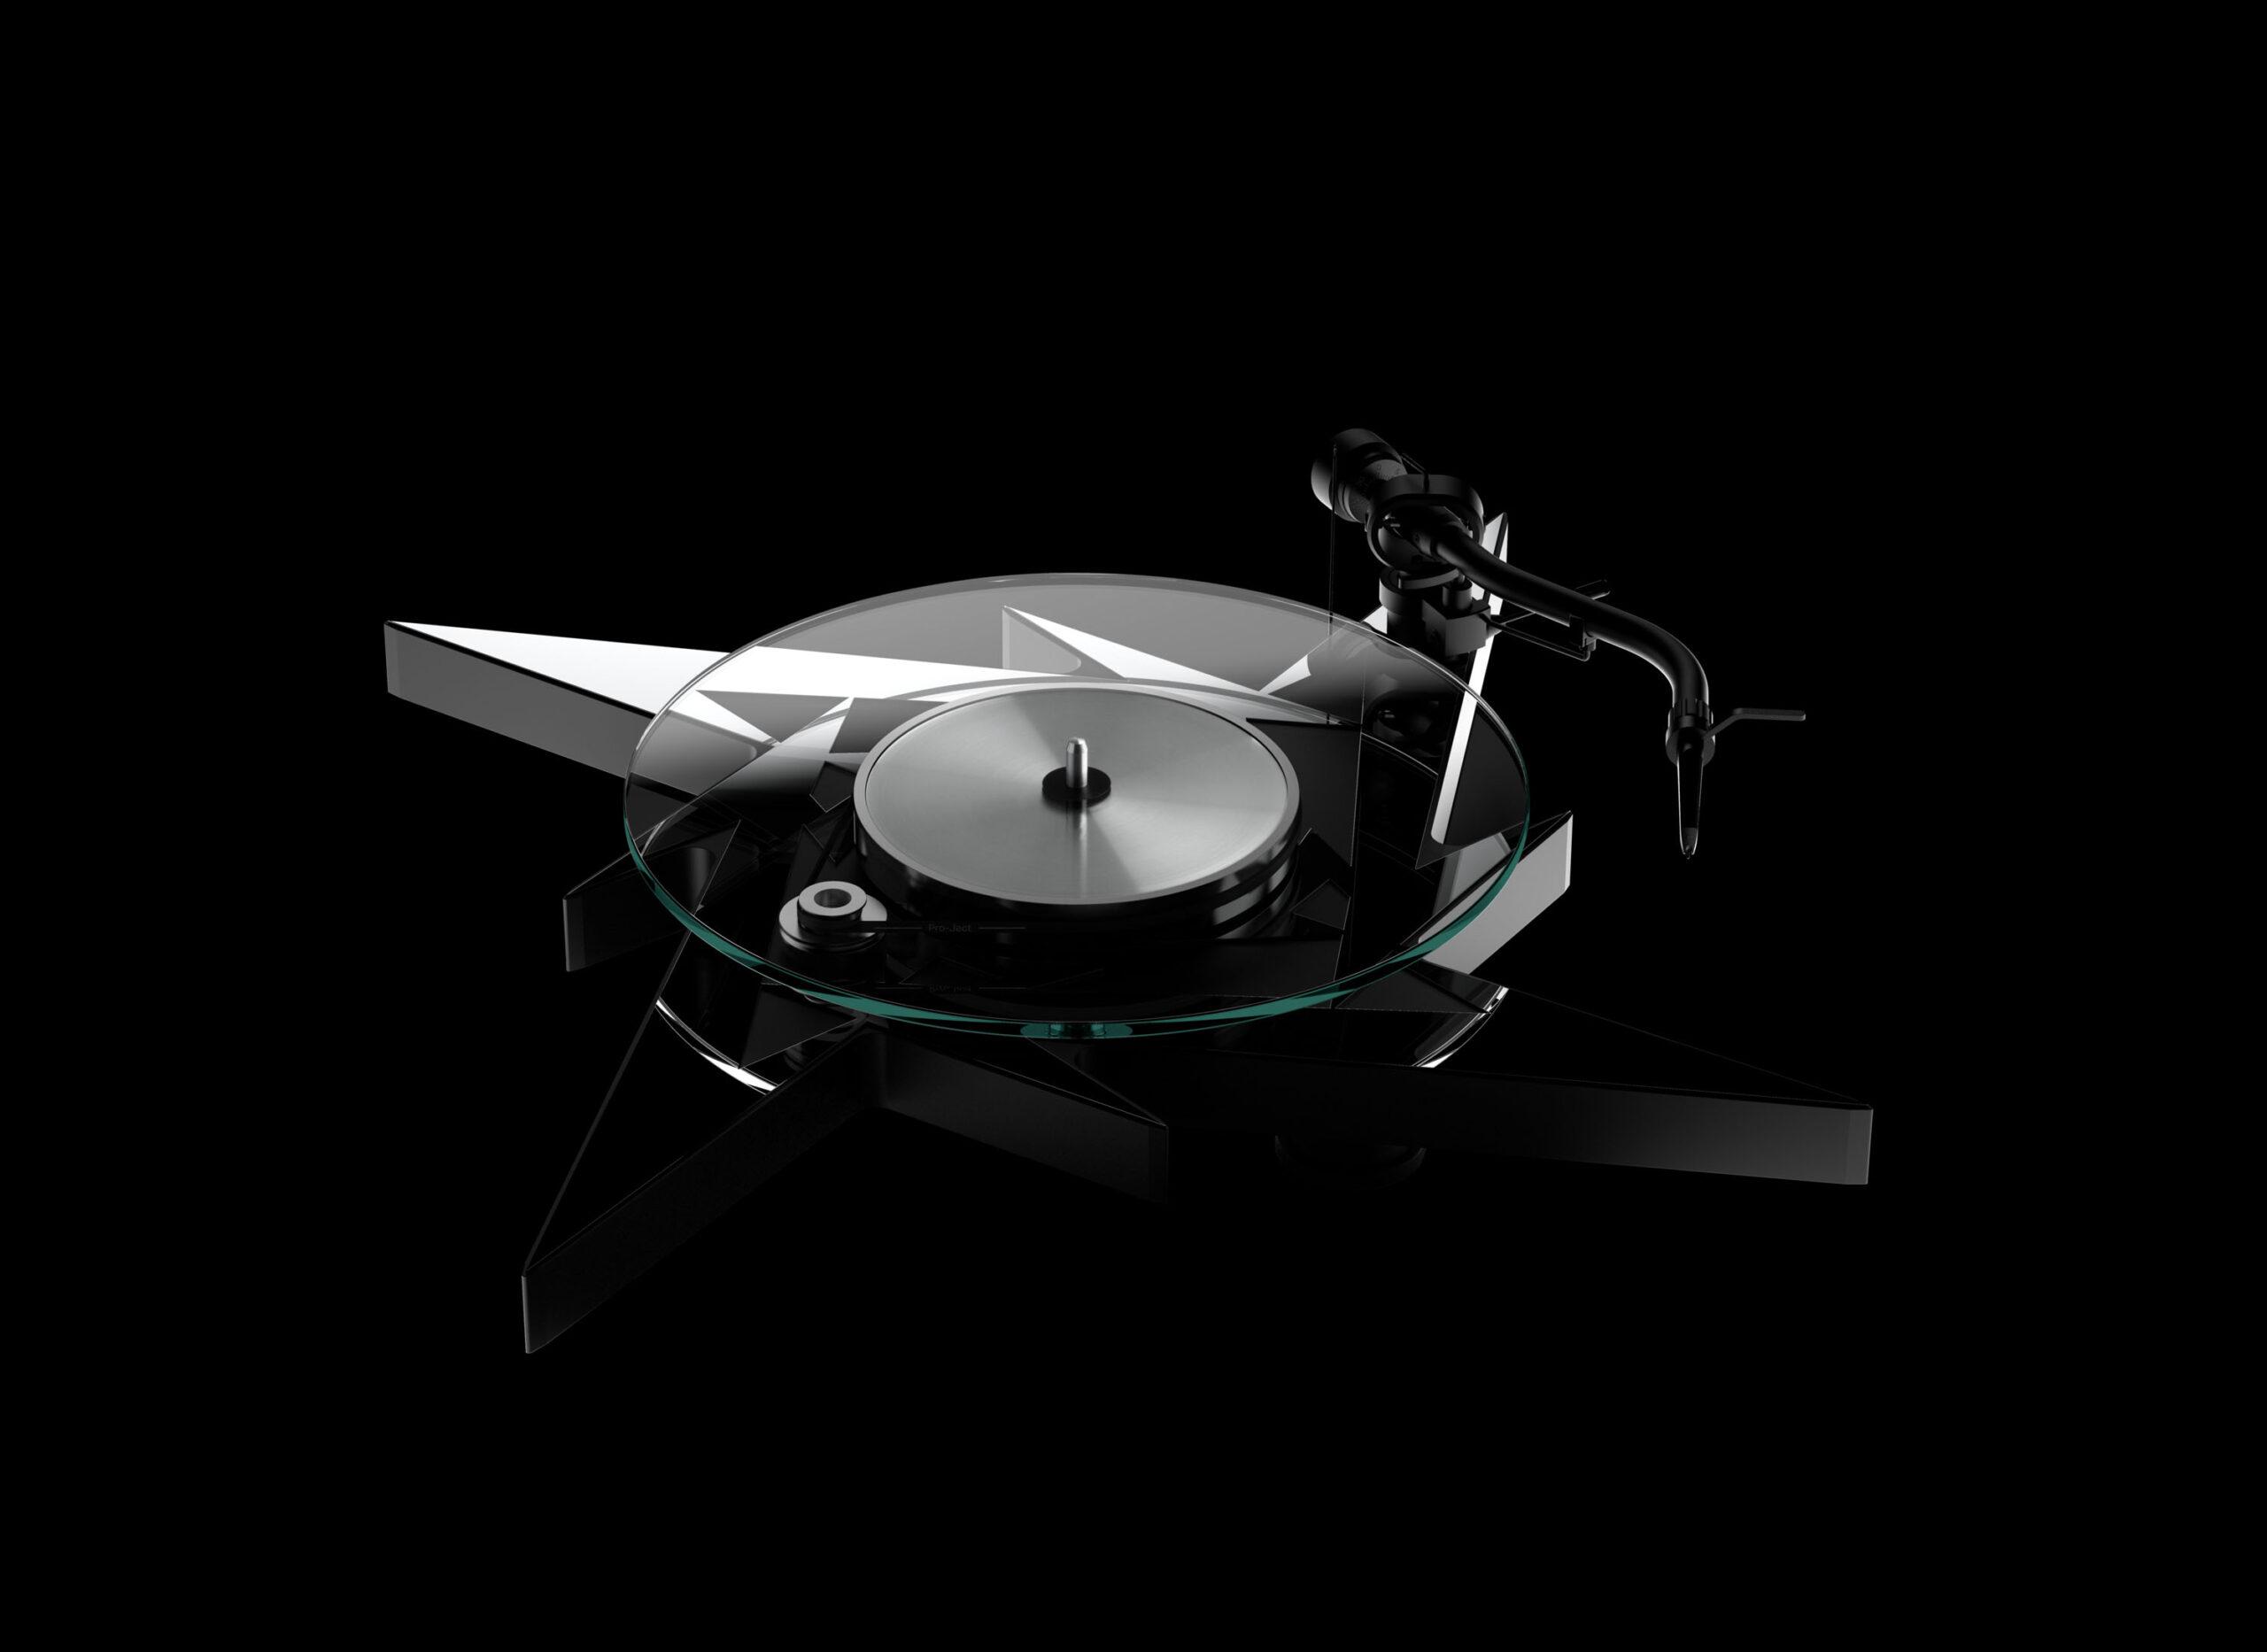 You won't mistake this turntable for any other! 98aacdd7 metallica tt front black 3 v2 scaled